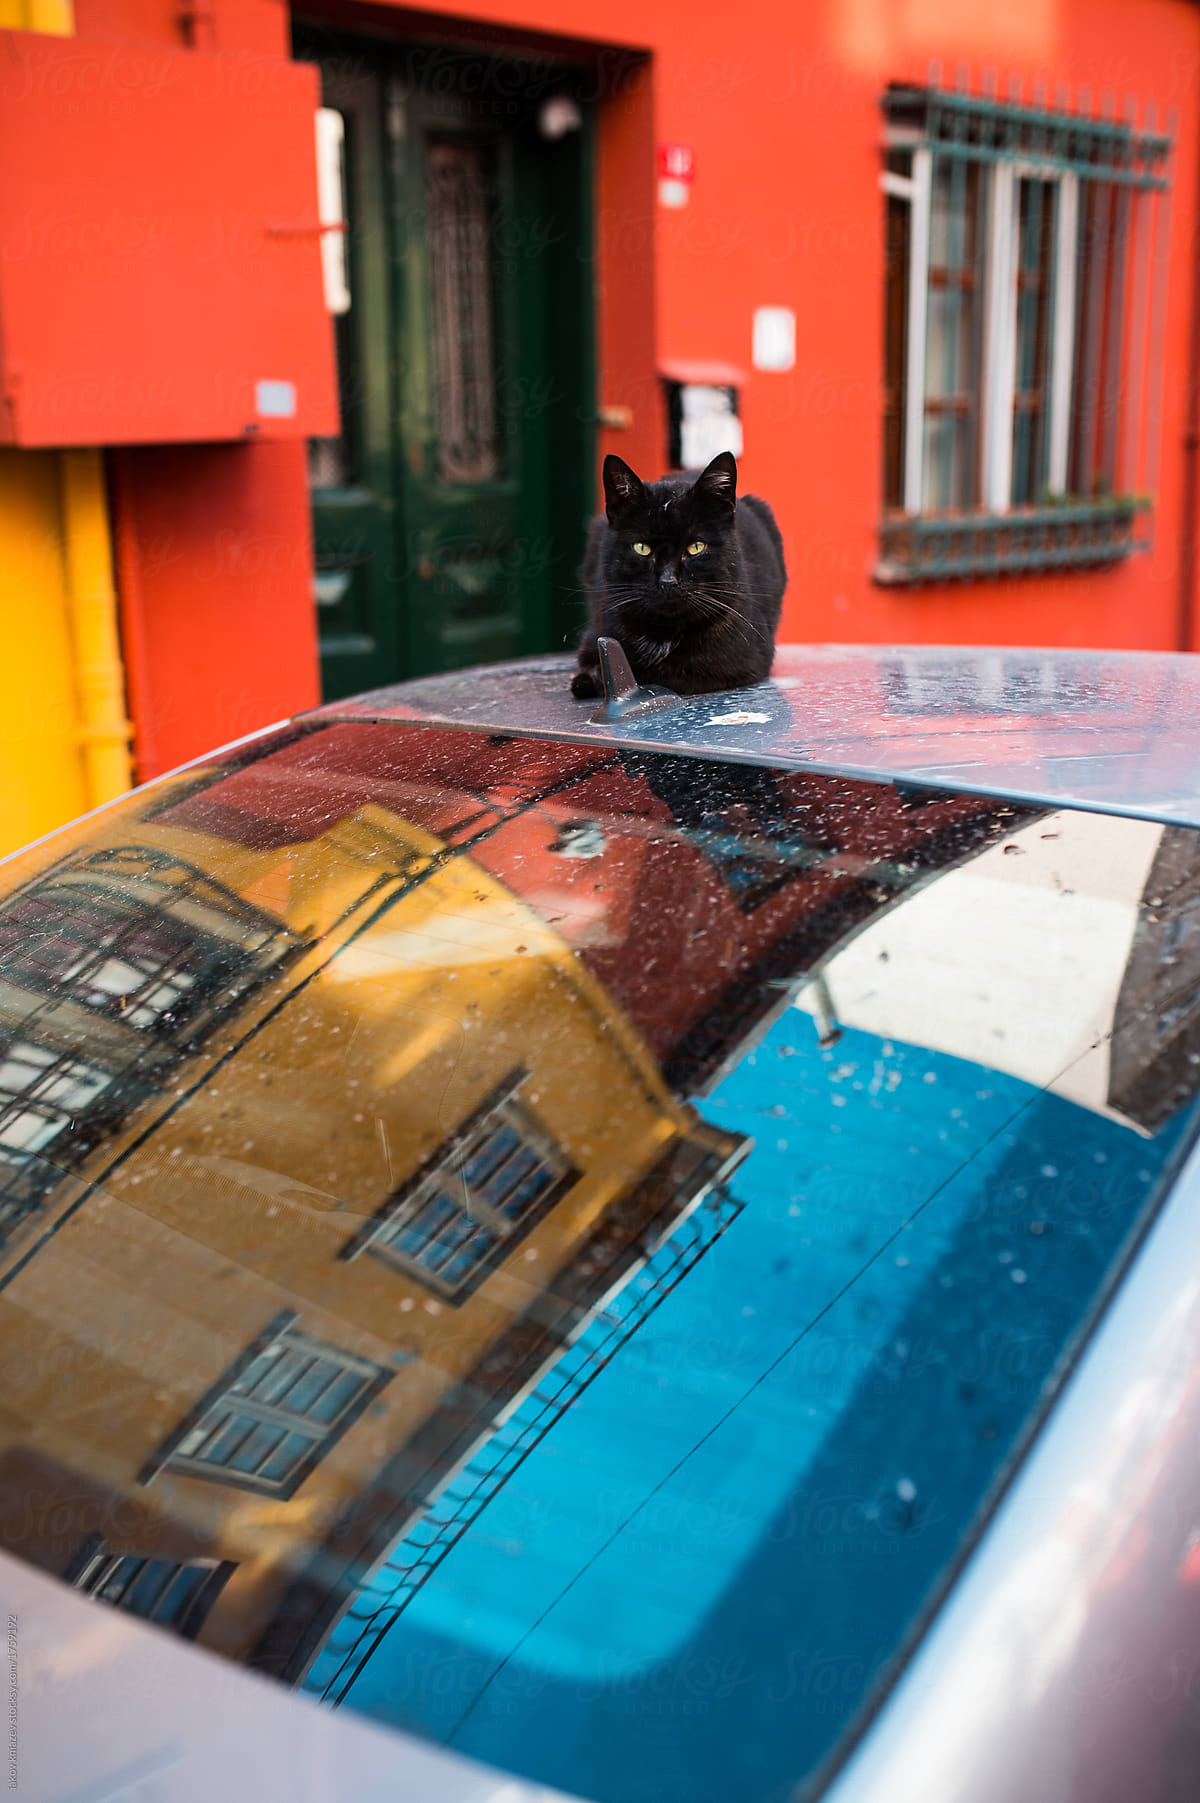 Black cat on the car roof against colourful background